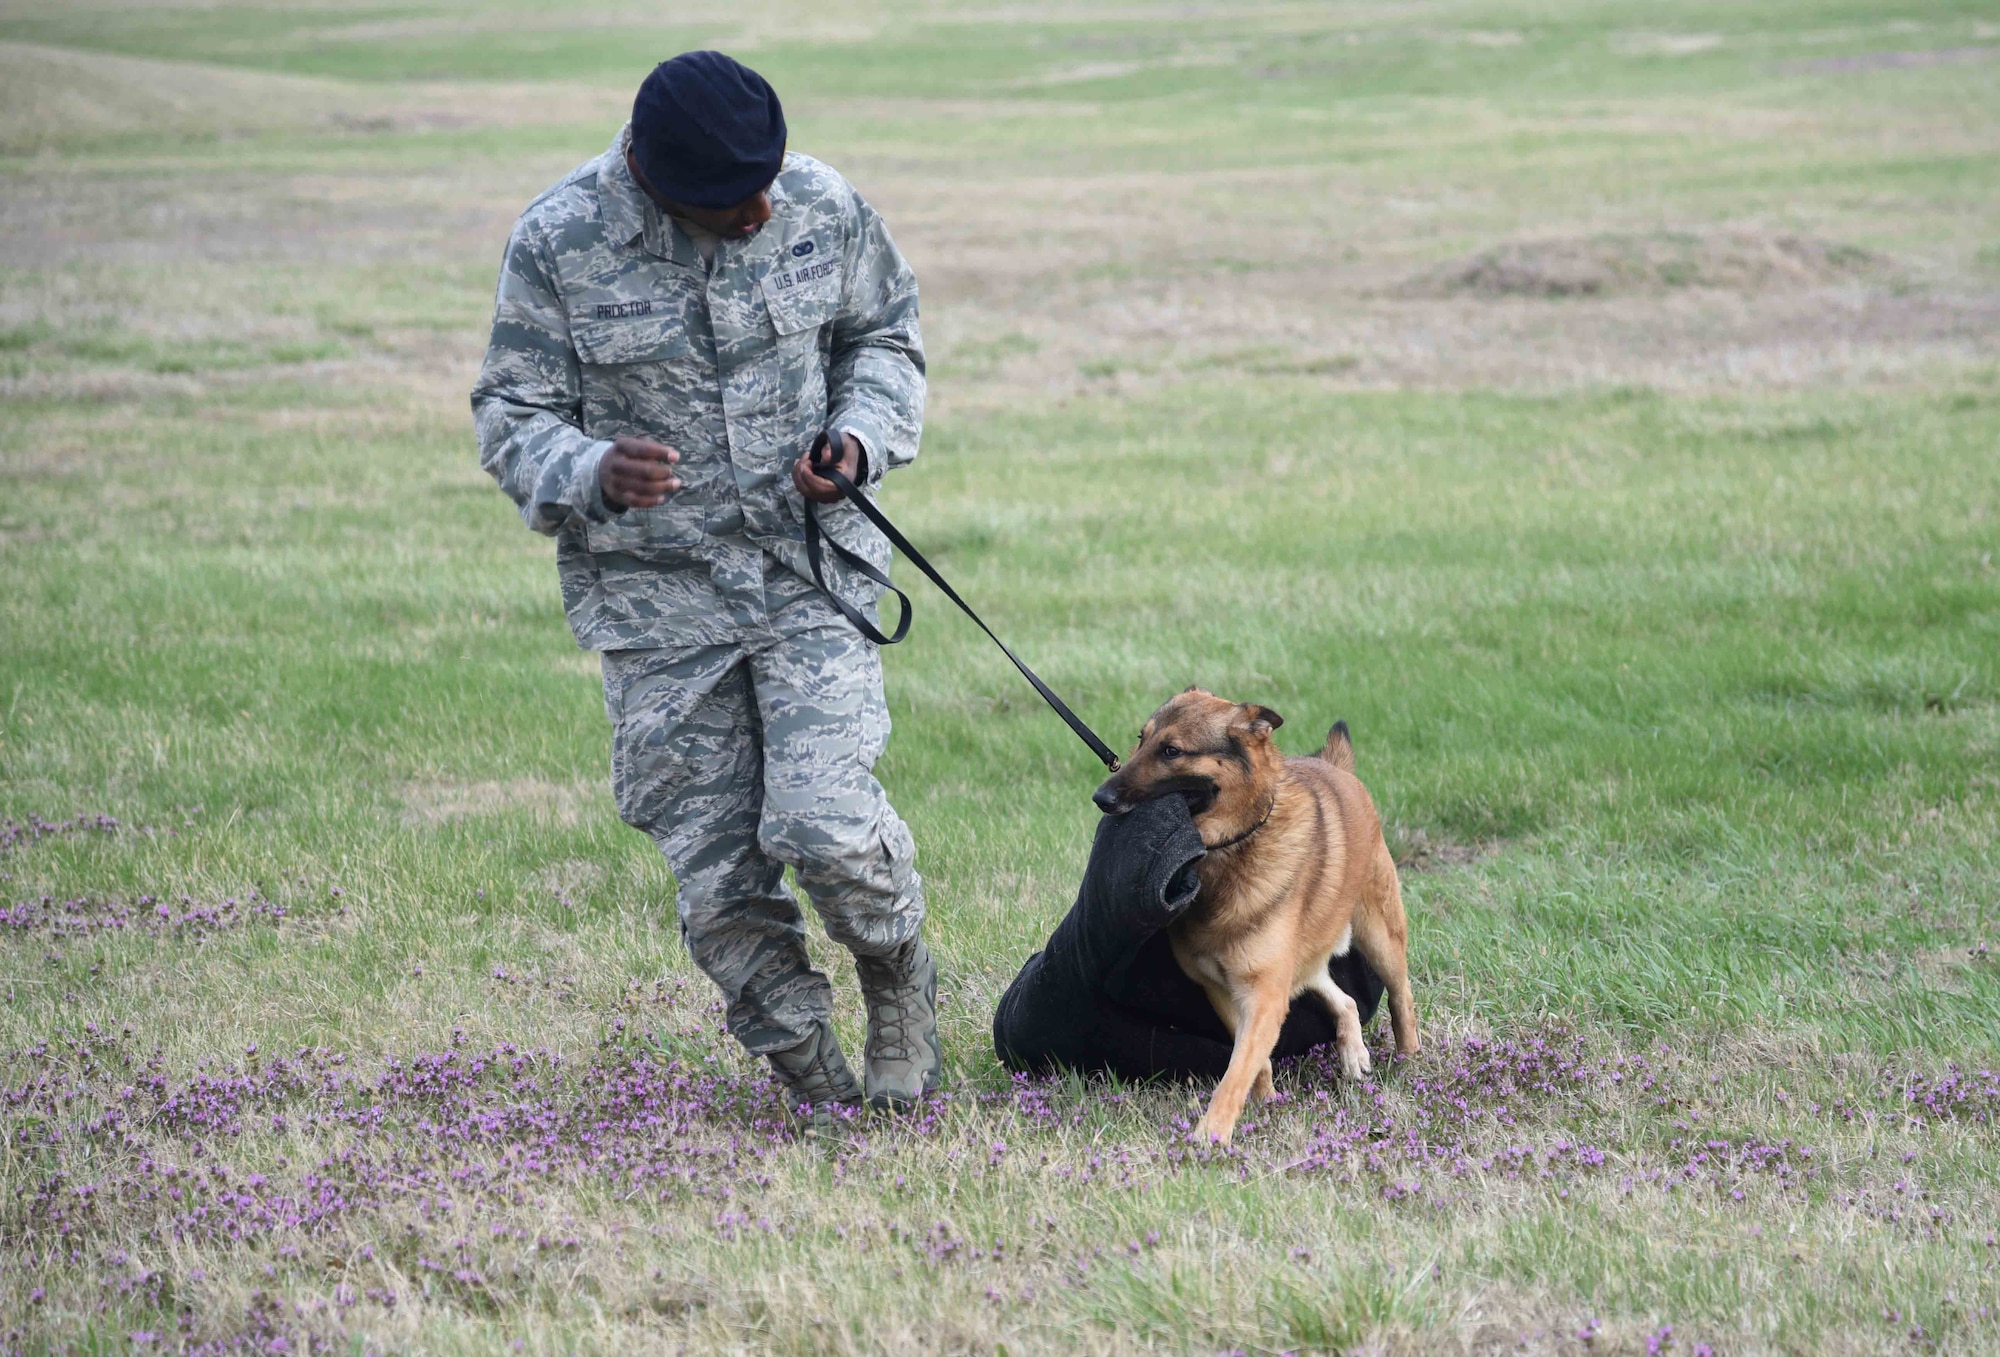 Senior Airman Brandon Proctor, 22nd Security Forces Squadron military working dog handler, walks with Iras, an MWD, as he proudly drags the bite suit that was used during his training session March 23, 2017, at McConnell Air Force Base, Kan. Iras was allowed to carry the jacket as a reward for doing well. (U.S. Air Force photo/Airman 1st Class Erin McClellan)